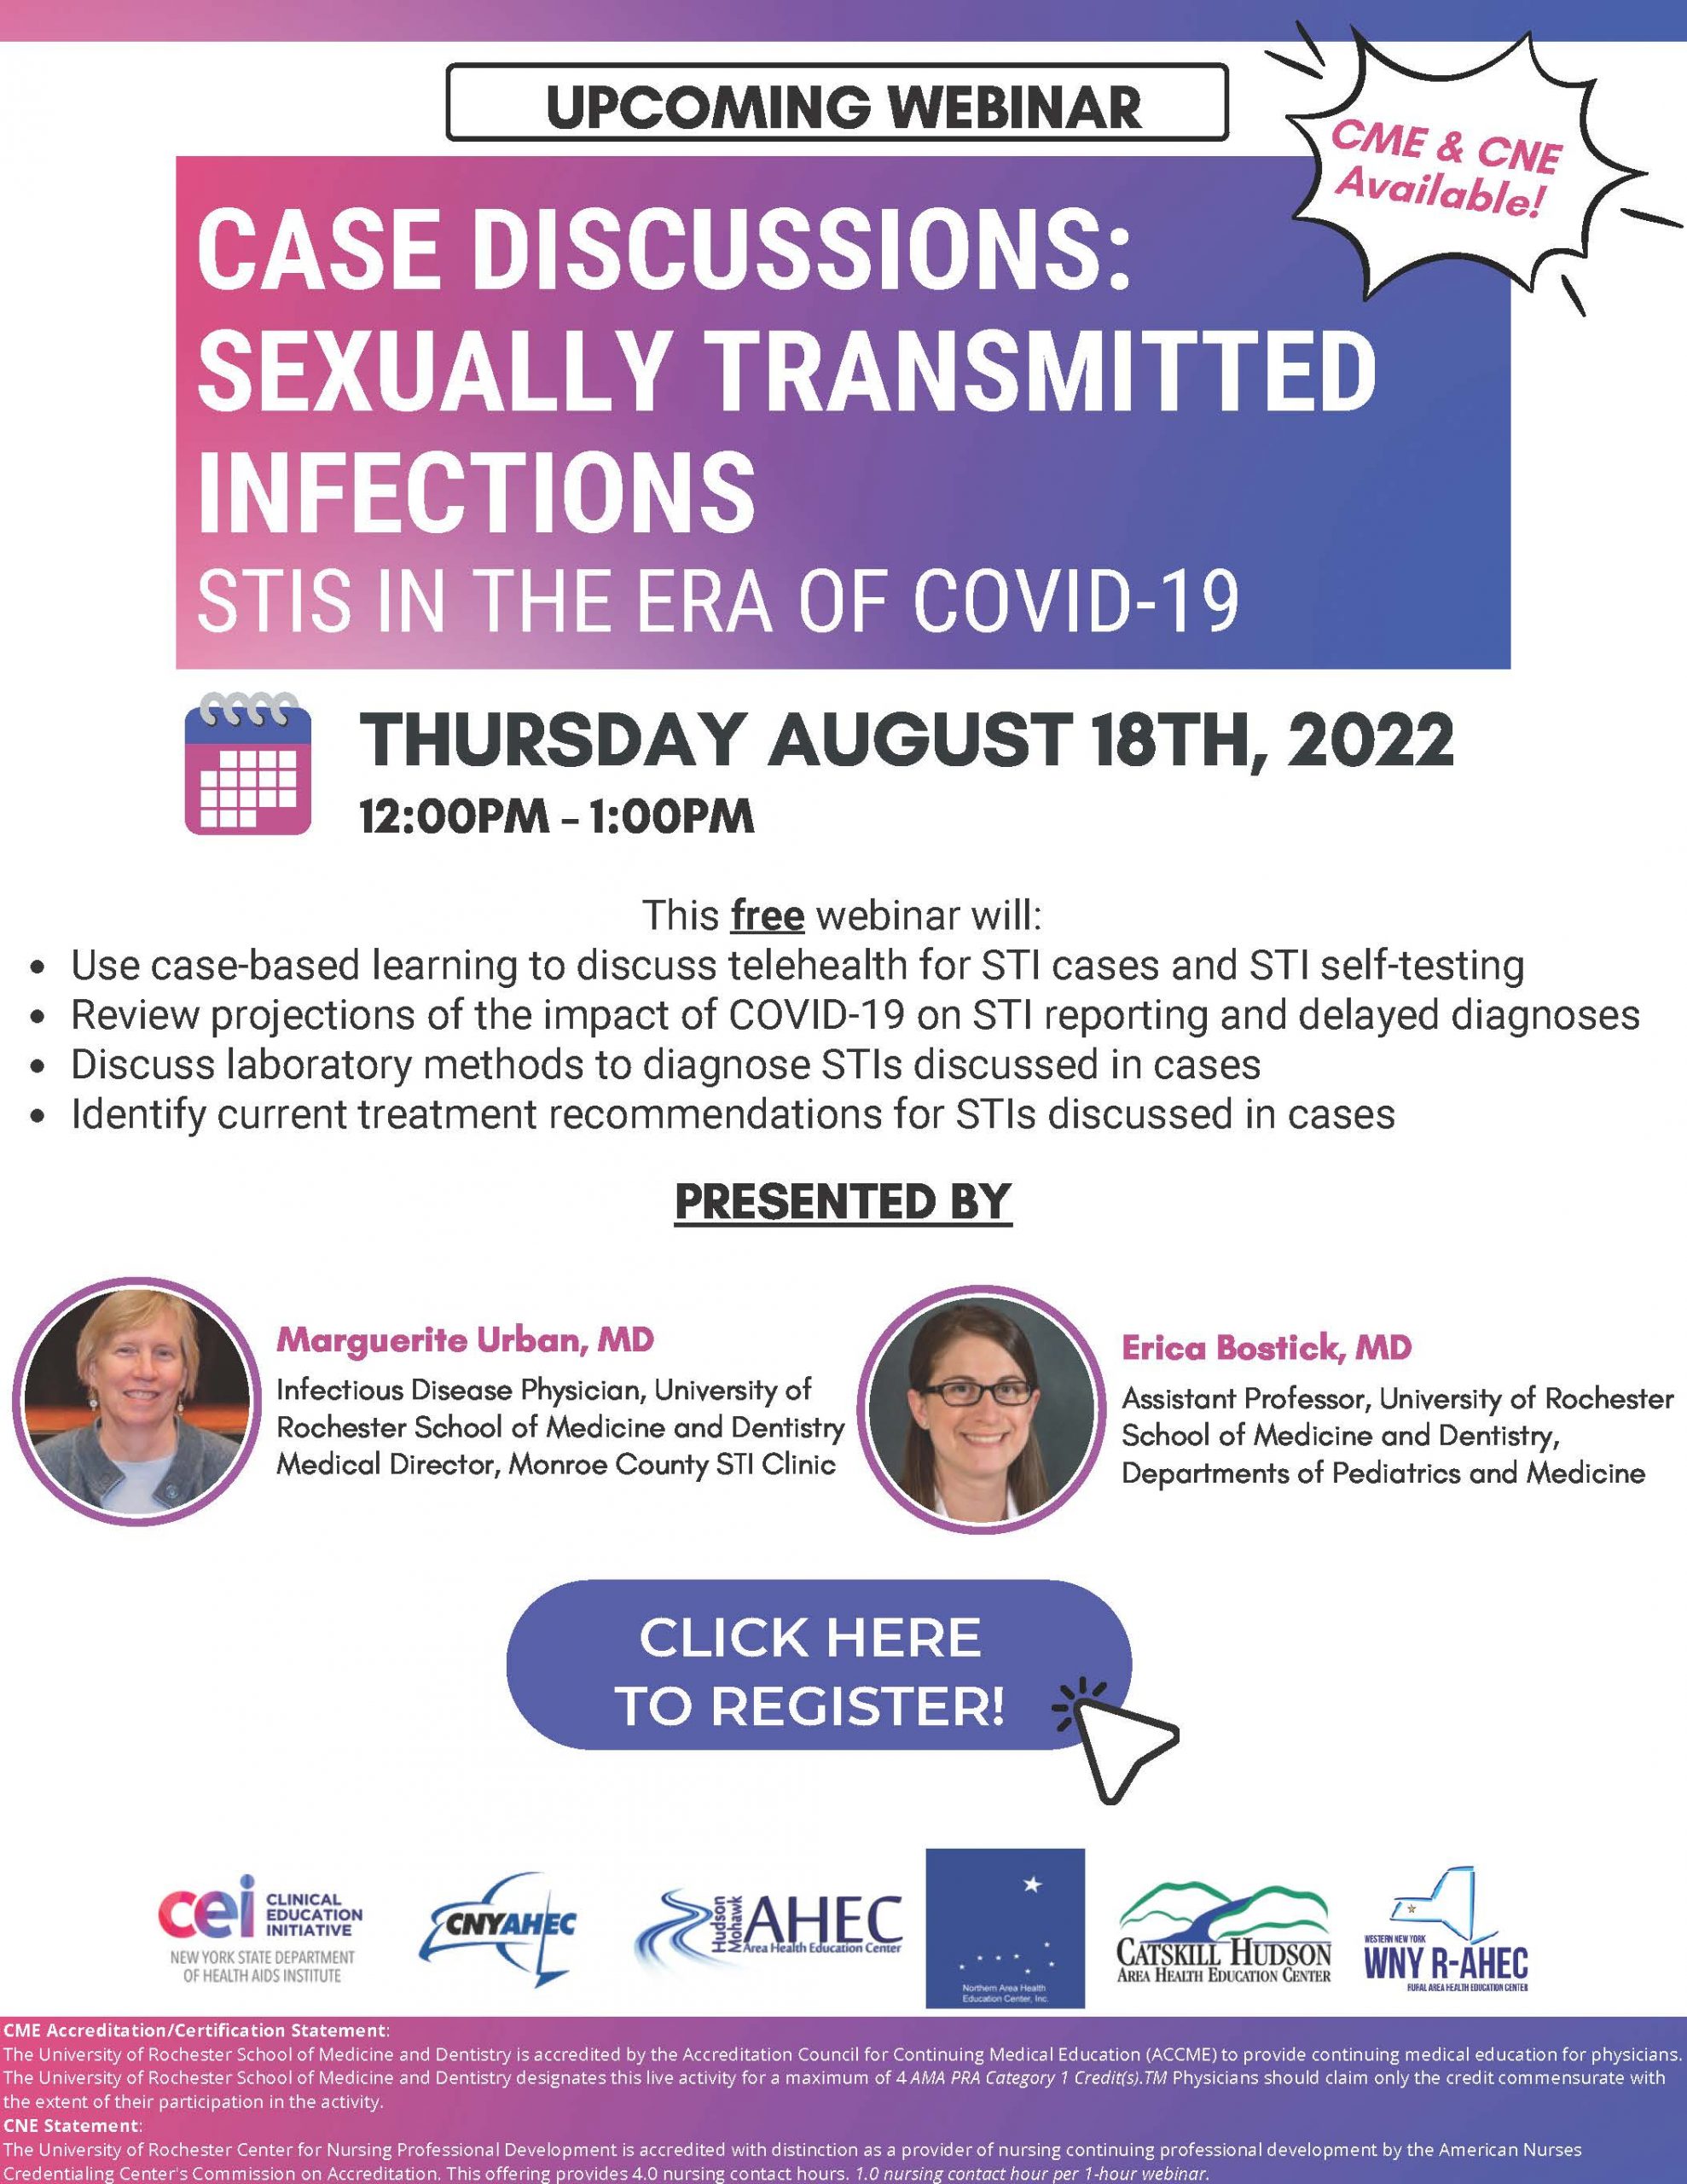 Case Discussions: Sexually Transmitted Infections STIs in the Era of Covid-19- August 18, 2022, 12-1pm